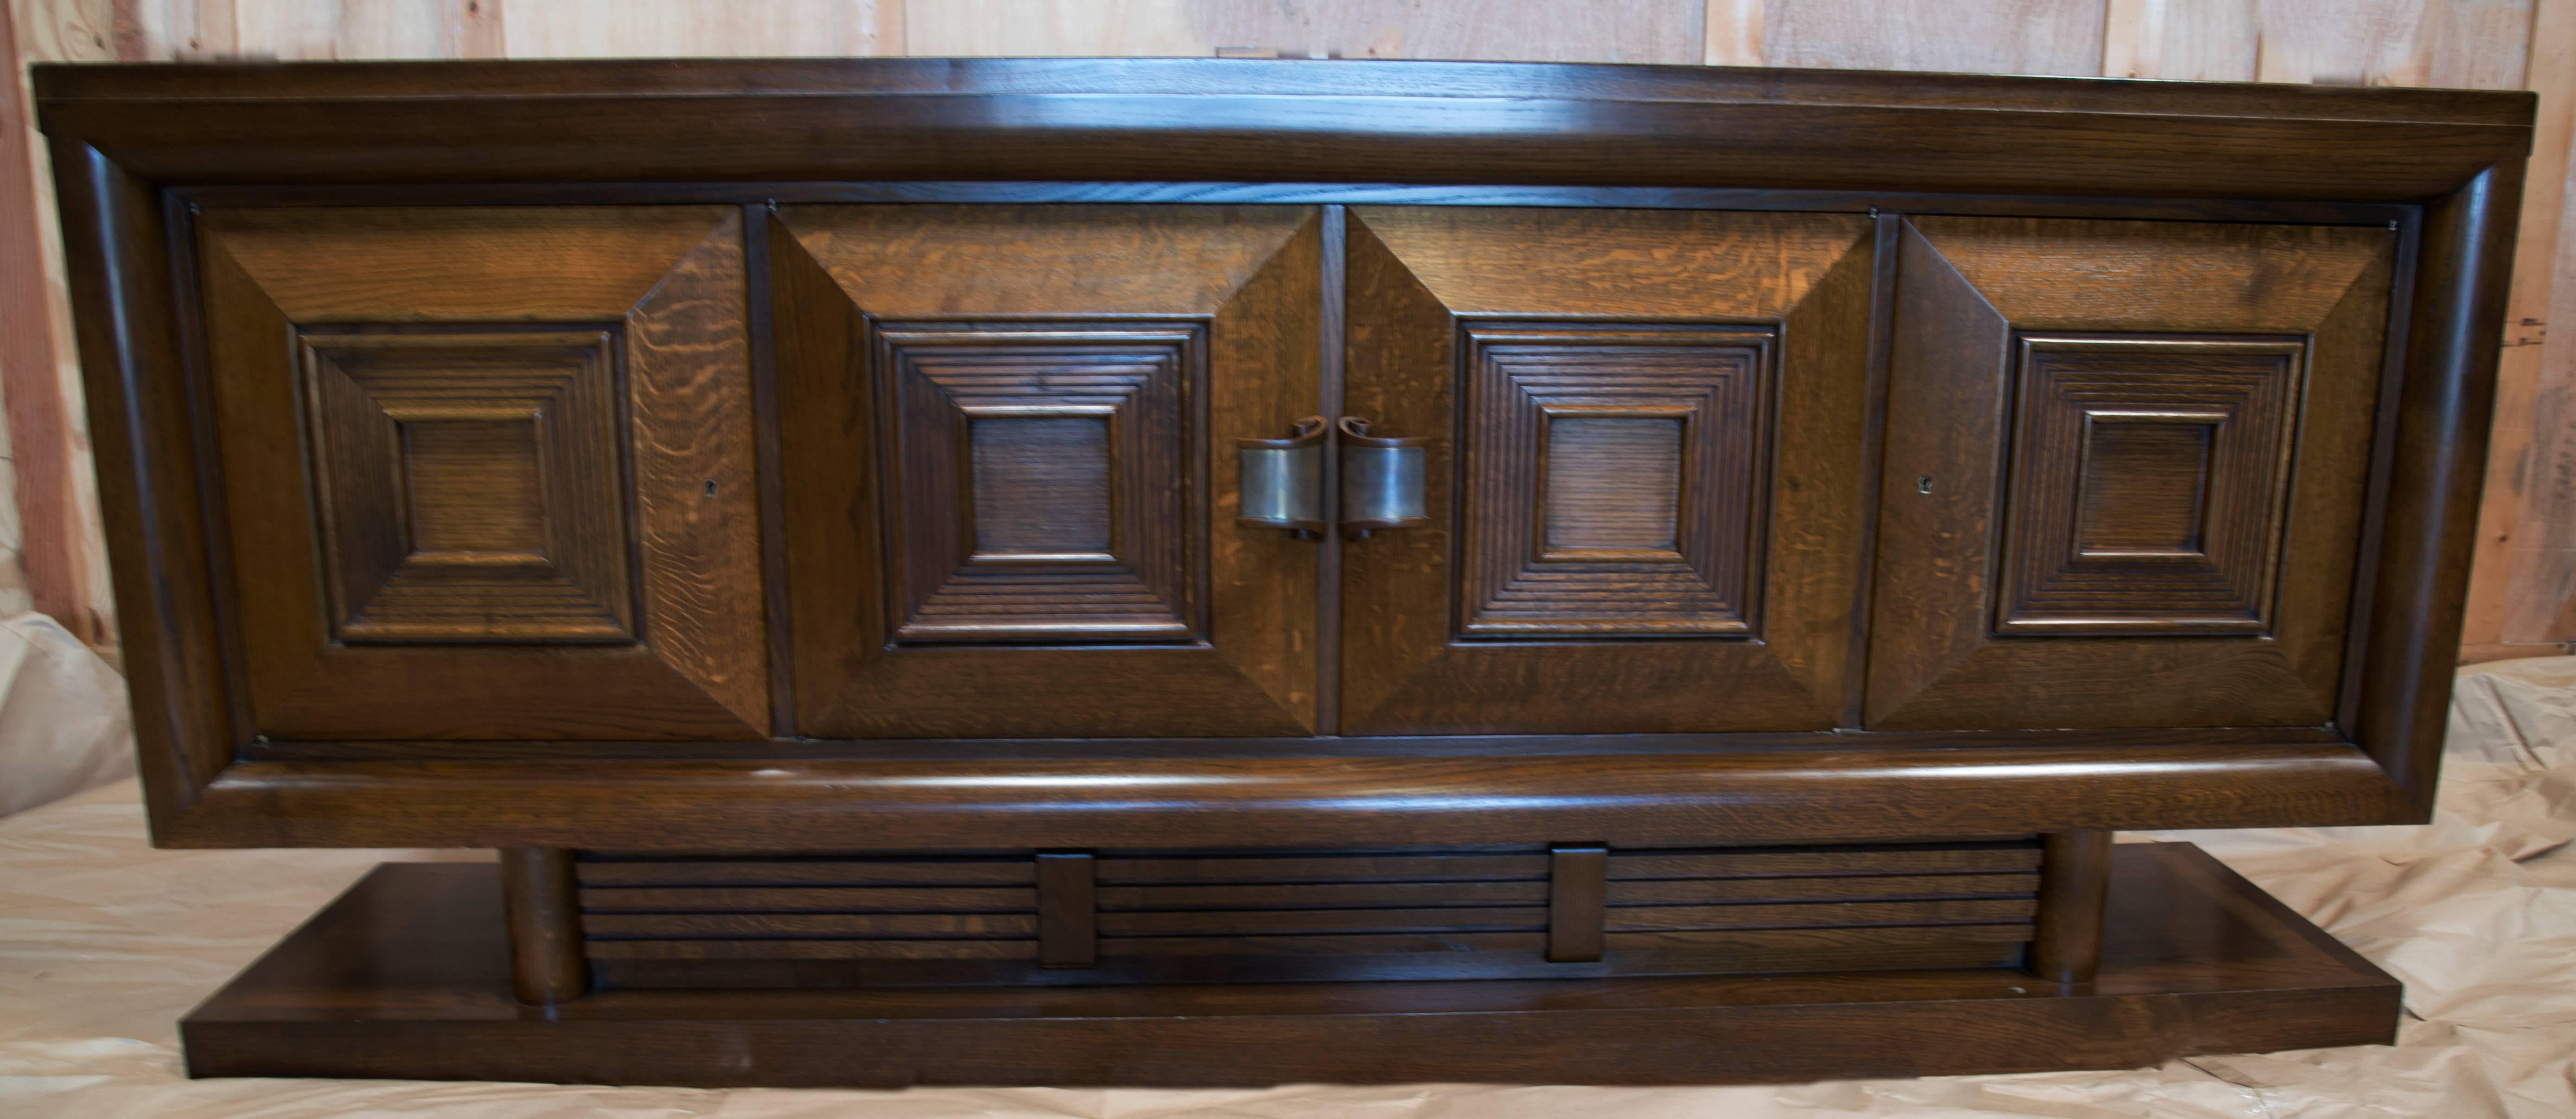 Solid perused oak buffet designed by CHARLES DUDOUYT, a famous French decorator [1885 - 1946]. This piece is part of his last designs. The amazing case piece comes with two cabinet doors that open to the interior of the cabinetry,  circa 1946. This